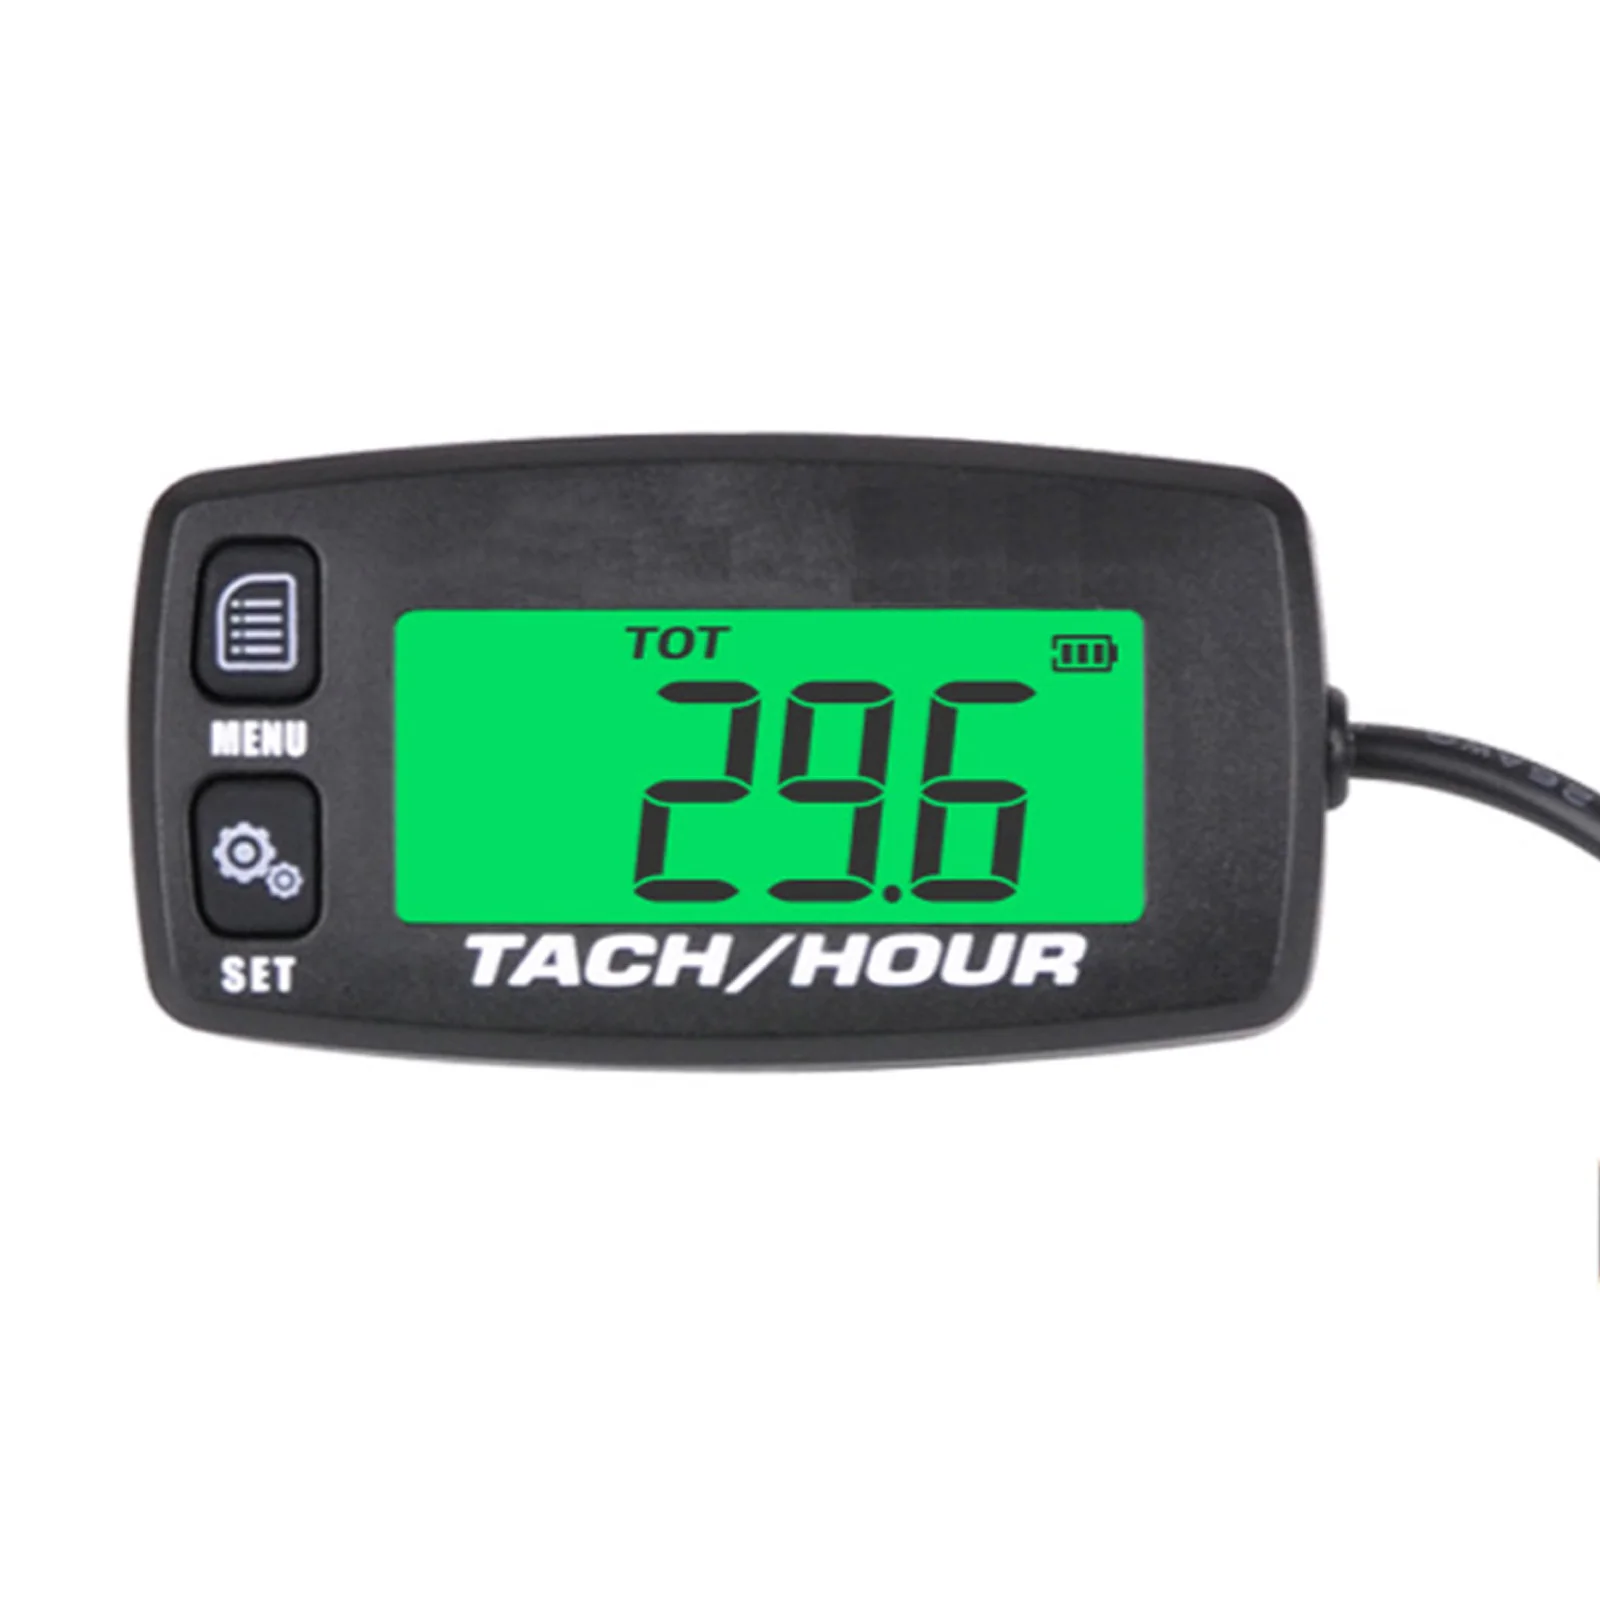 Tachometer Motorcycle Meter Resettable Digital Tacho Hour Meter For Boats Marine - £24.60 GBP